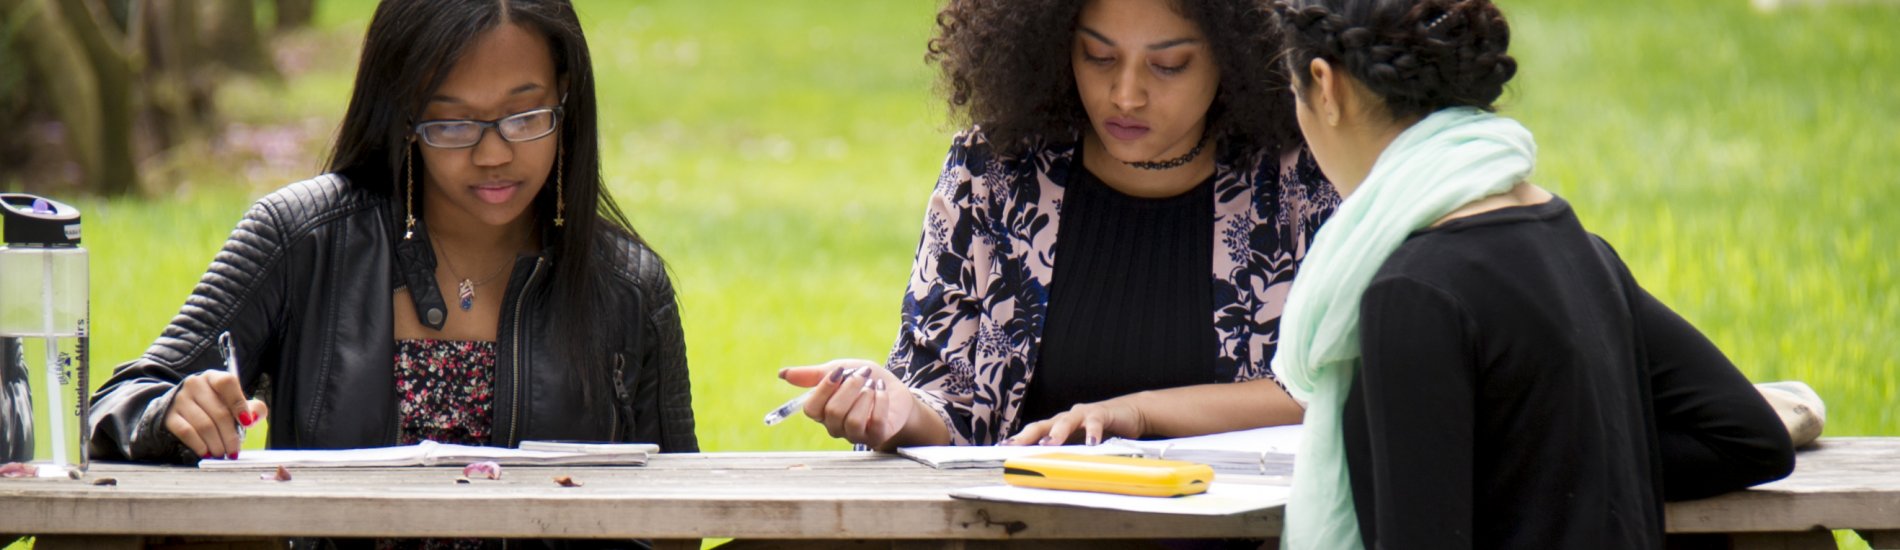 UAlbany students studying together at picnic table